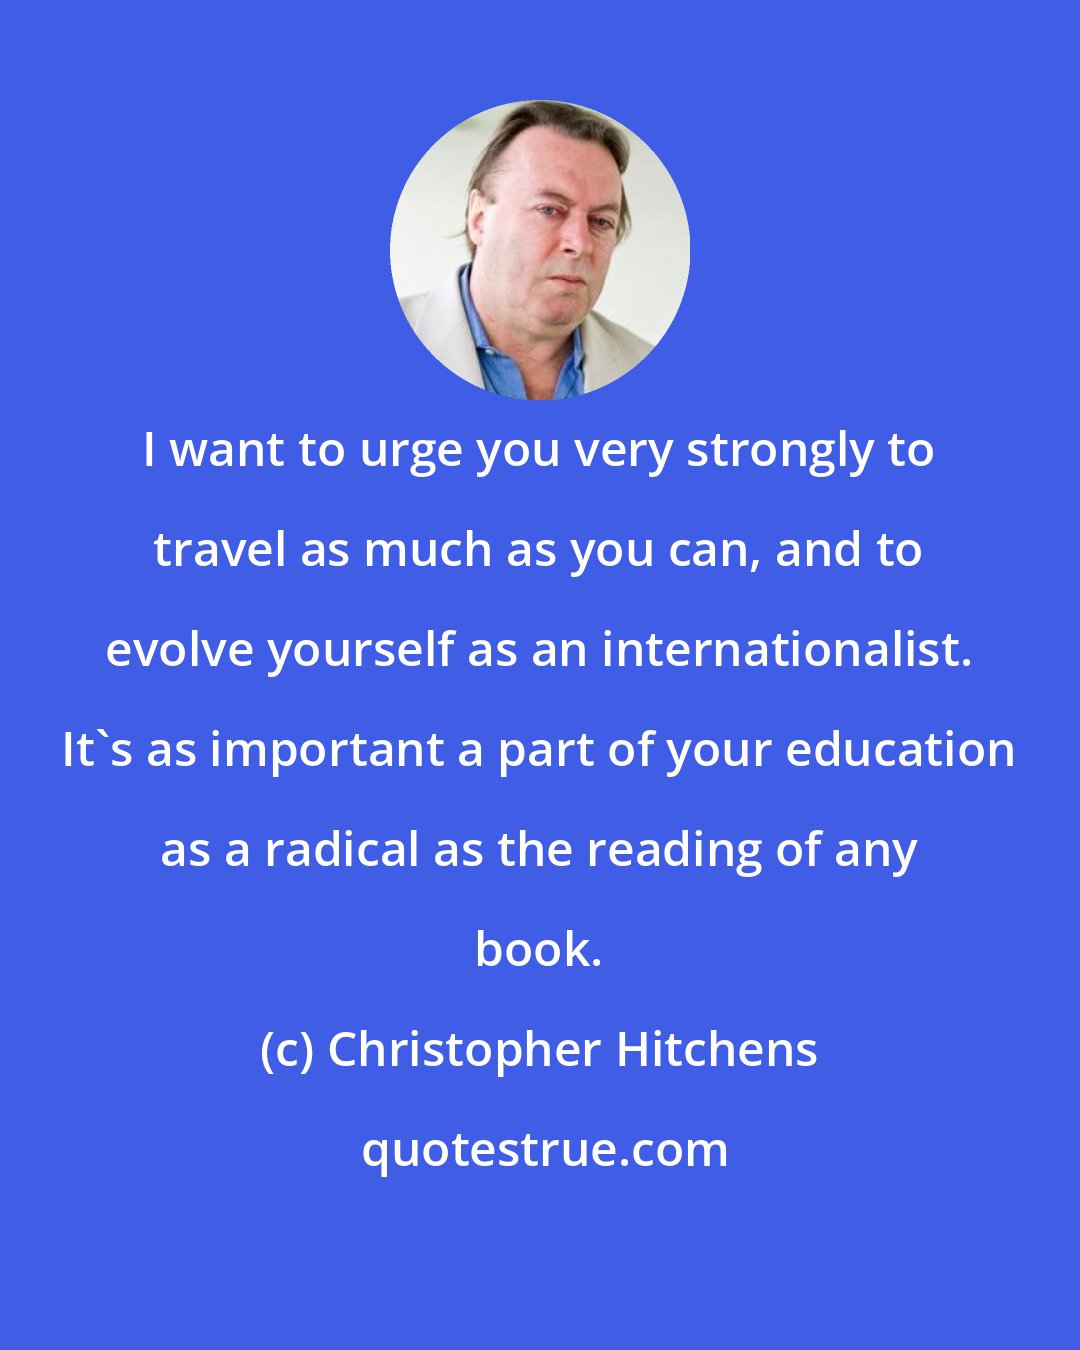 Christopher Hitchens: I want to urge you very strongly to travel as much as you can, and to evolve yourself as an internationalist. It's as important a part of your education as a radical as the reading of any book.